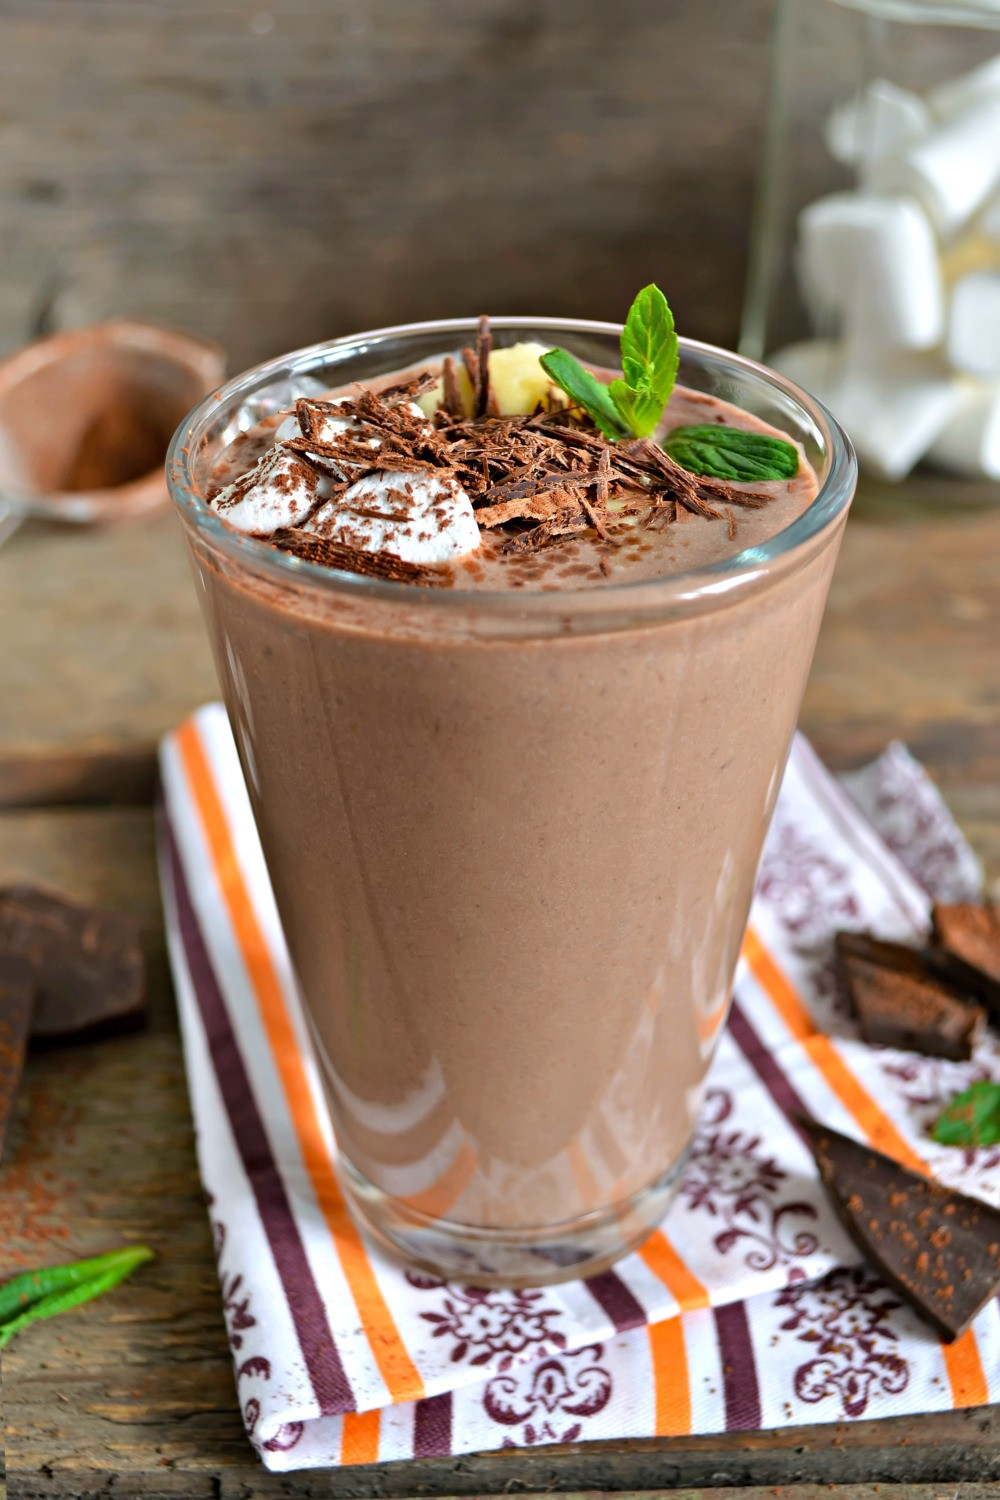 Peanut Butter Smoothie Recipes
 Chocolate Peanut Butter Protein Smoothie Recipe